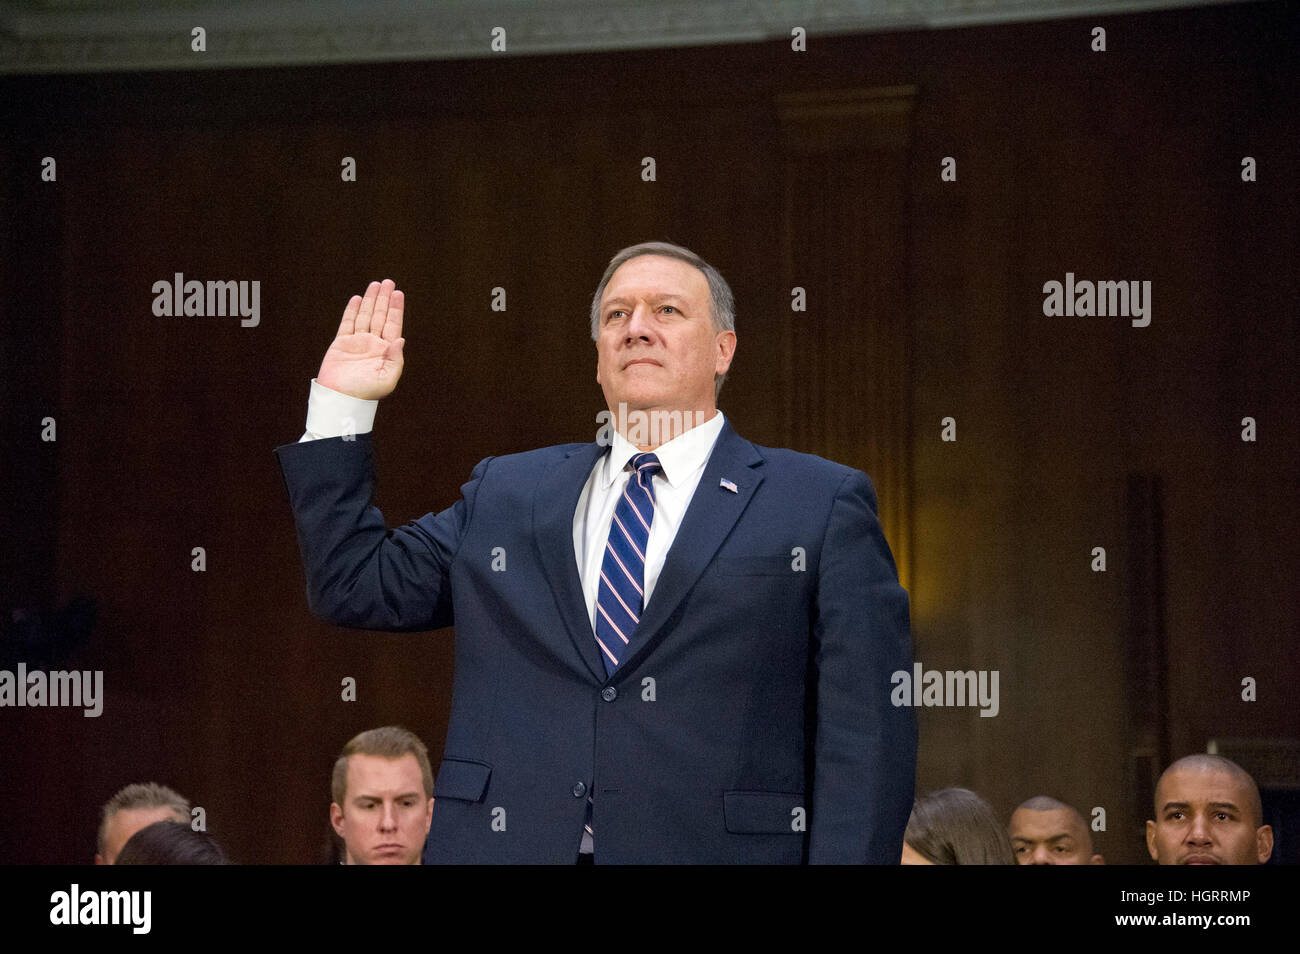 Washington DC, USA. 12th January 2017. United States Representative Mike Pompeo (Republican of Kansas) is sworn-in to testify before the US Senate Select Committee on Intelligence during a confirmation hearing on his nomination to be Director of the Central Intelligence Agency (CIA) on Capitol Hill in Washington, DC on Thursday, January 12, 2017. Credit: MediaPunch Inc/Alamy Live News Stock Photo